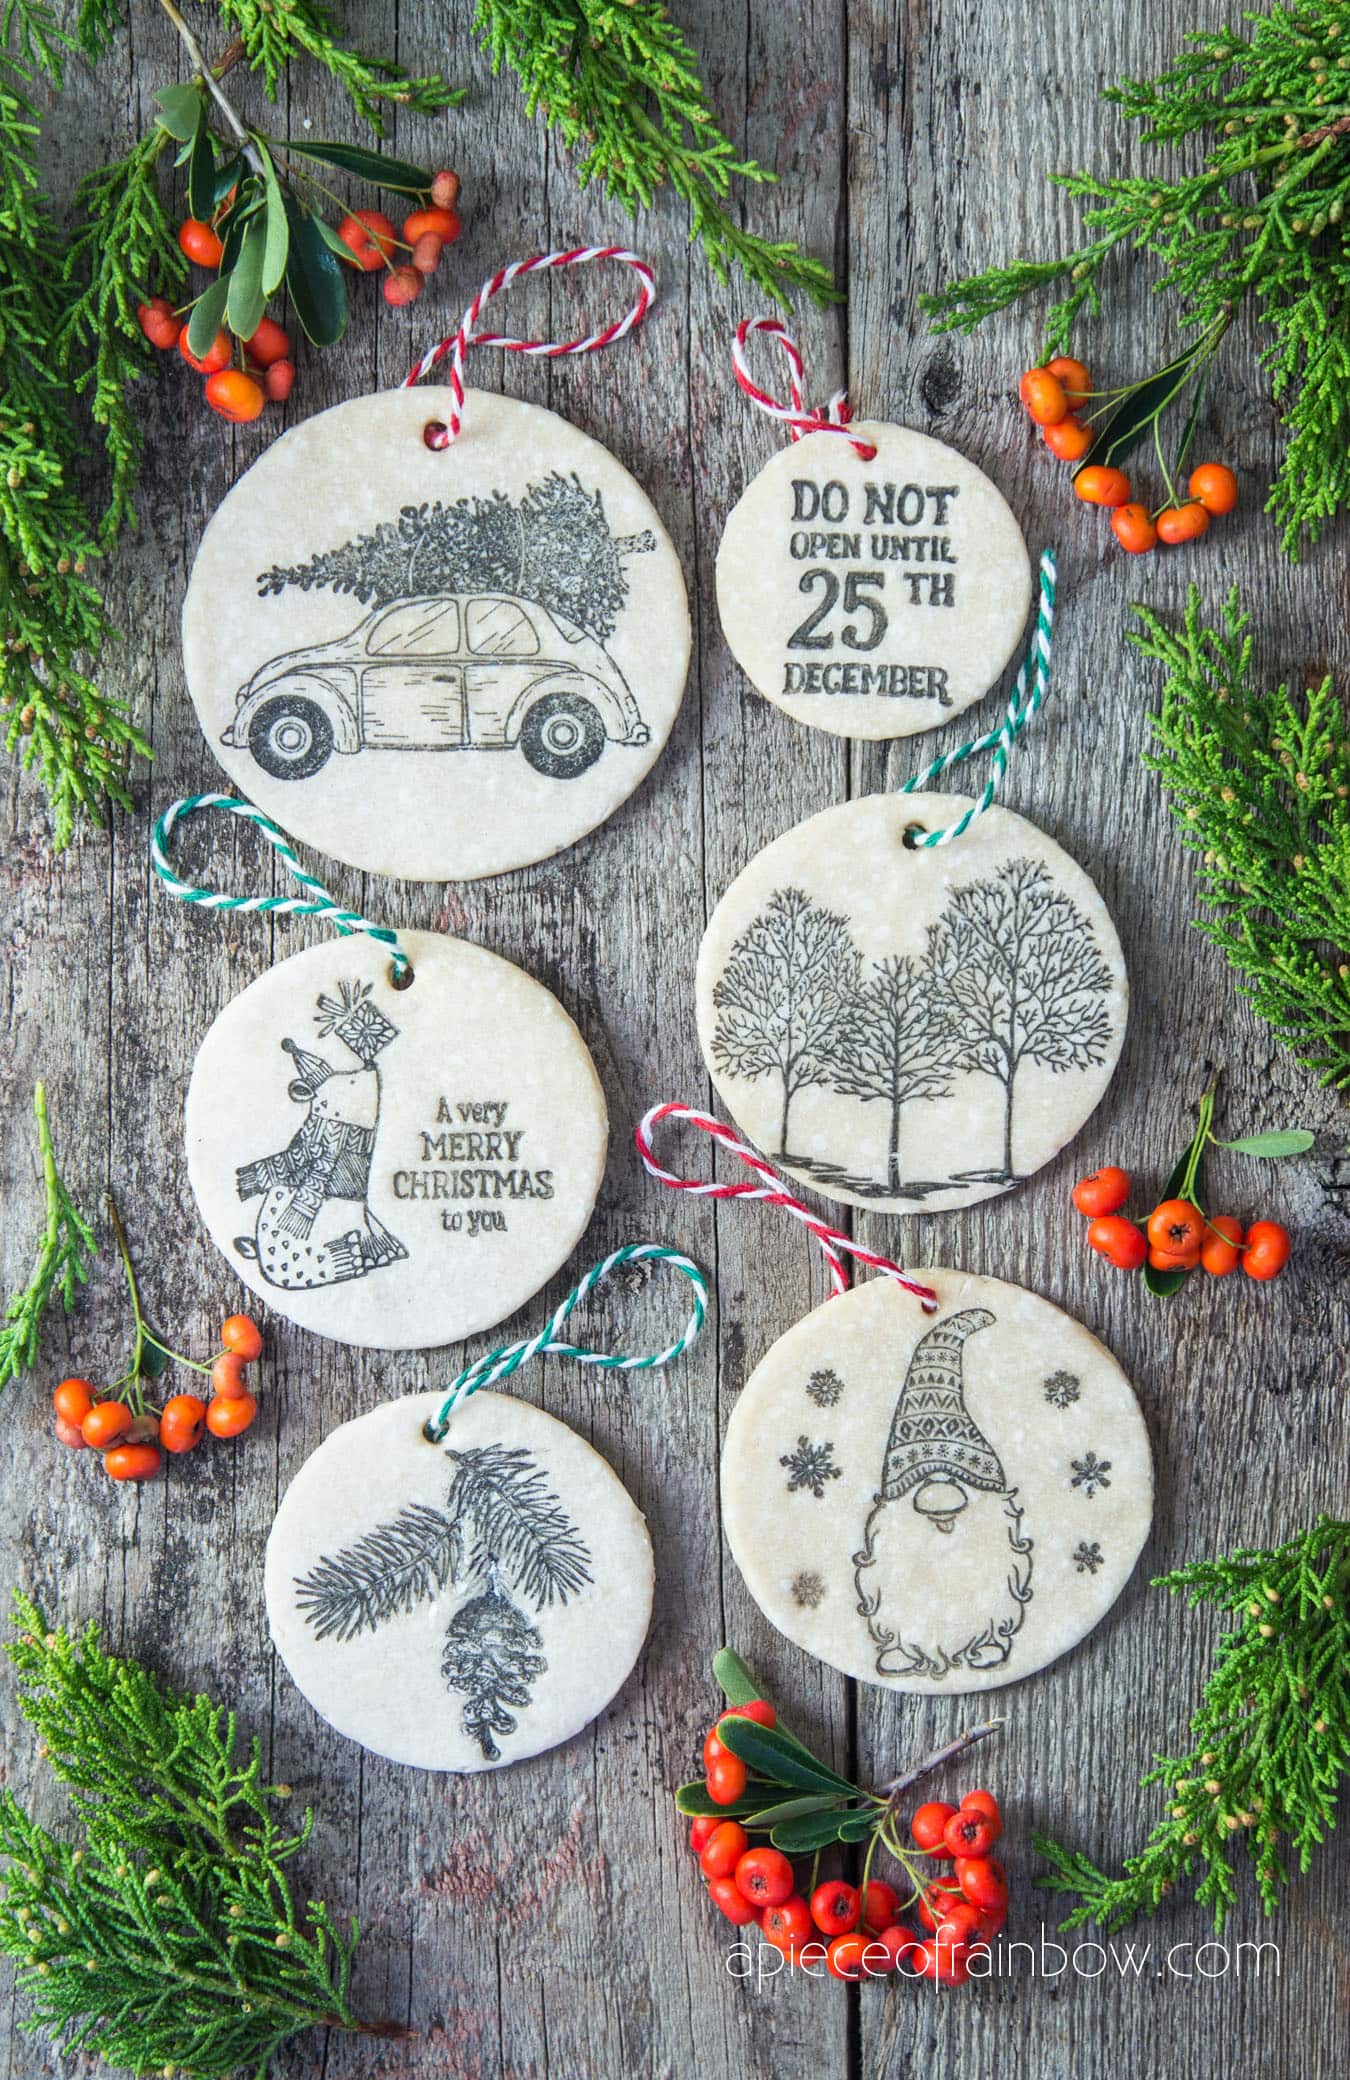 Anthropologie style stamped salt dough Christmas ornaments & gift tags! Beautiful vintage farmhouse decorations & easy DIY crafts and stocking stuffer gift ideas